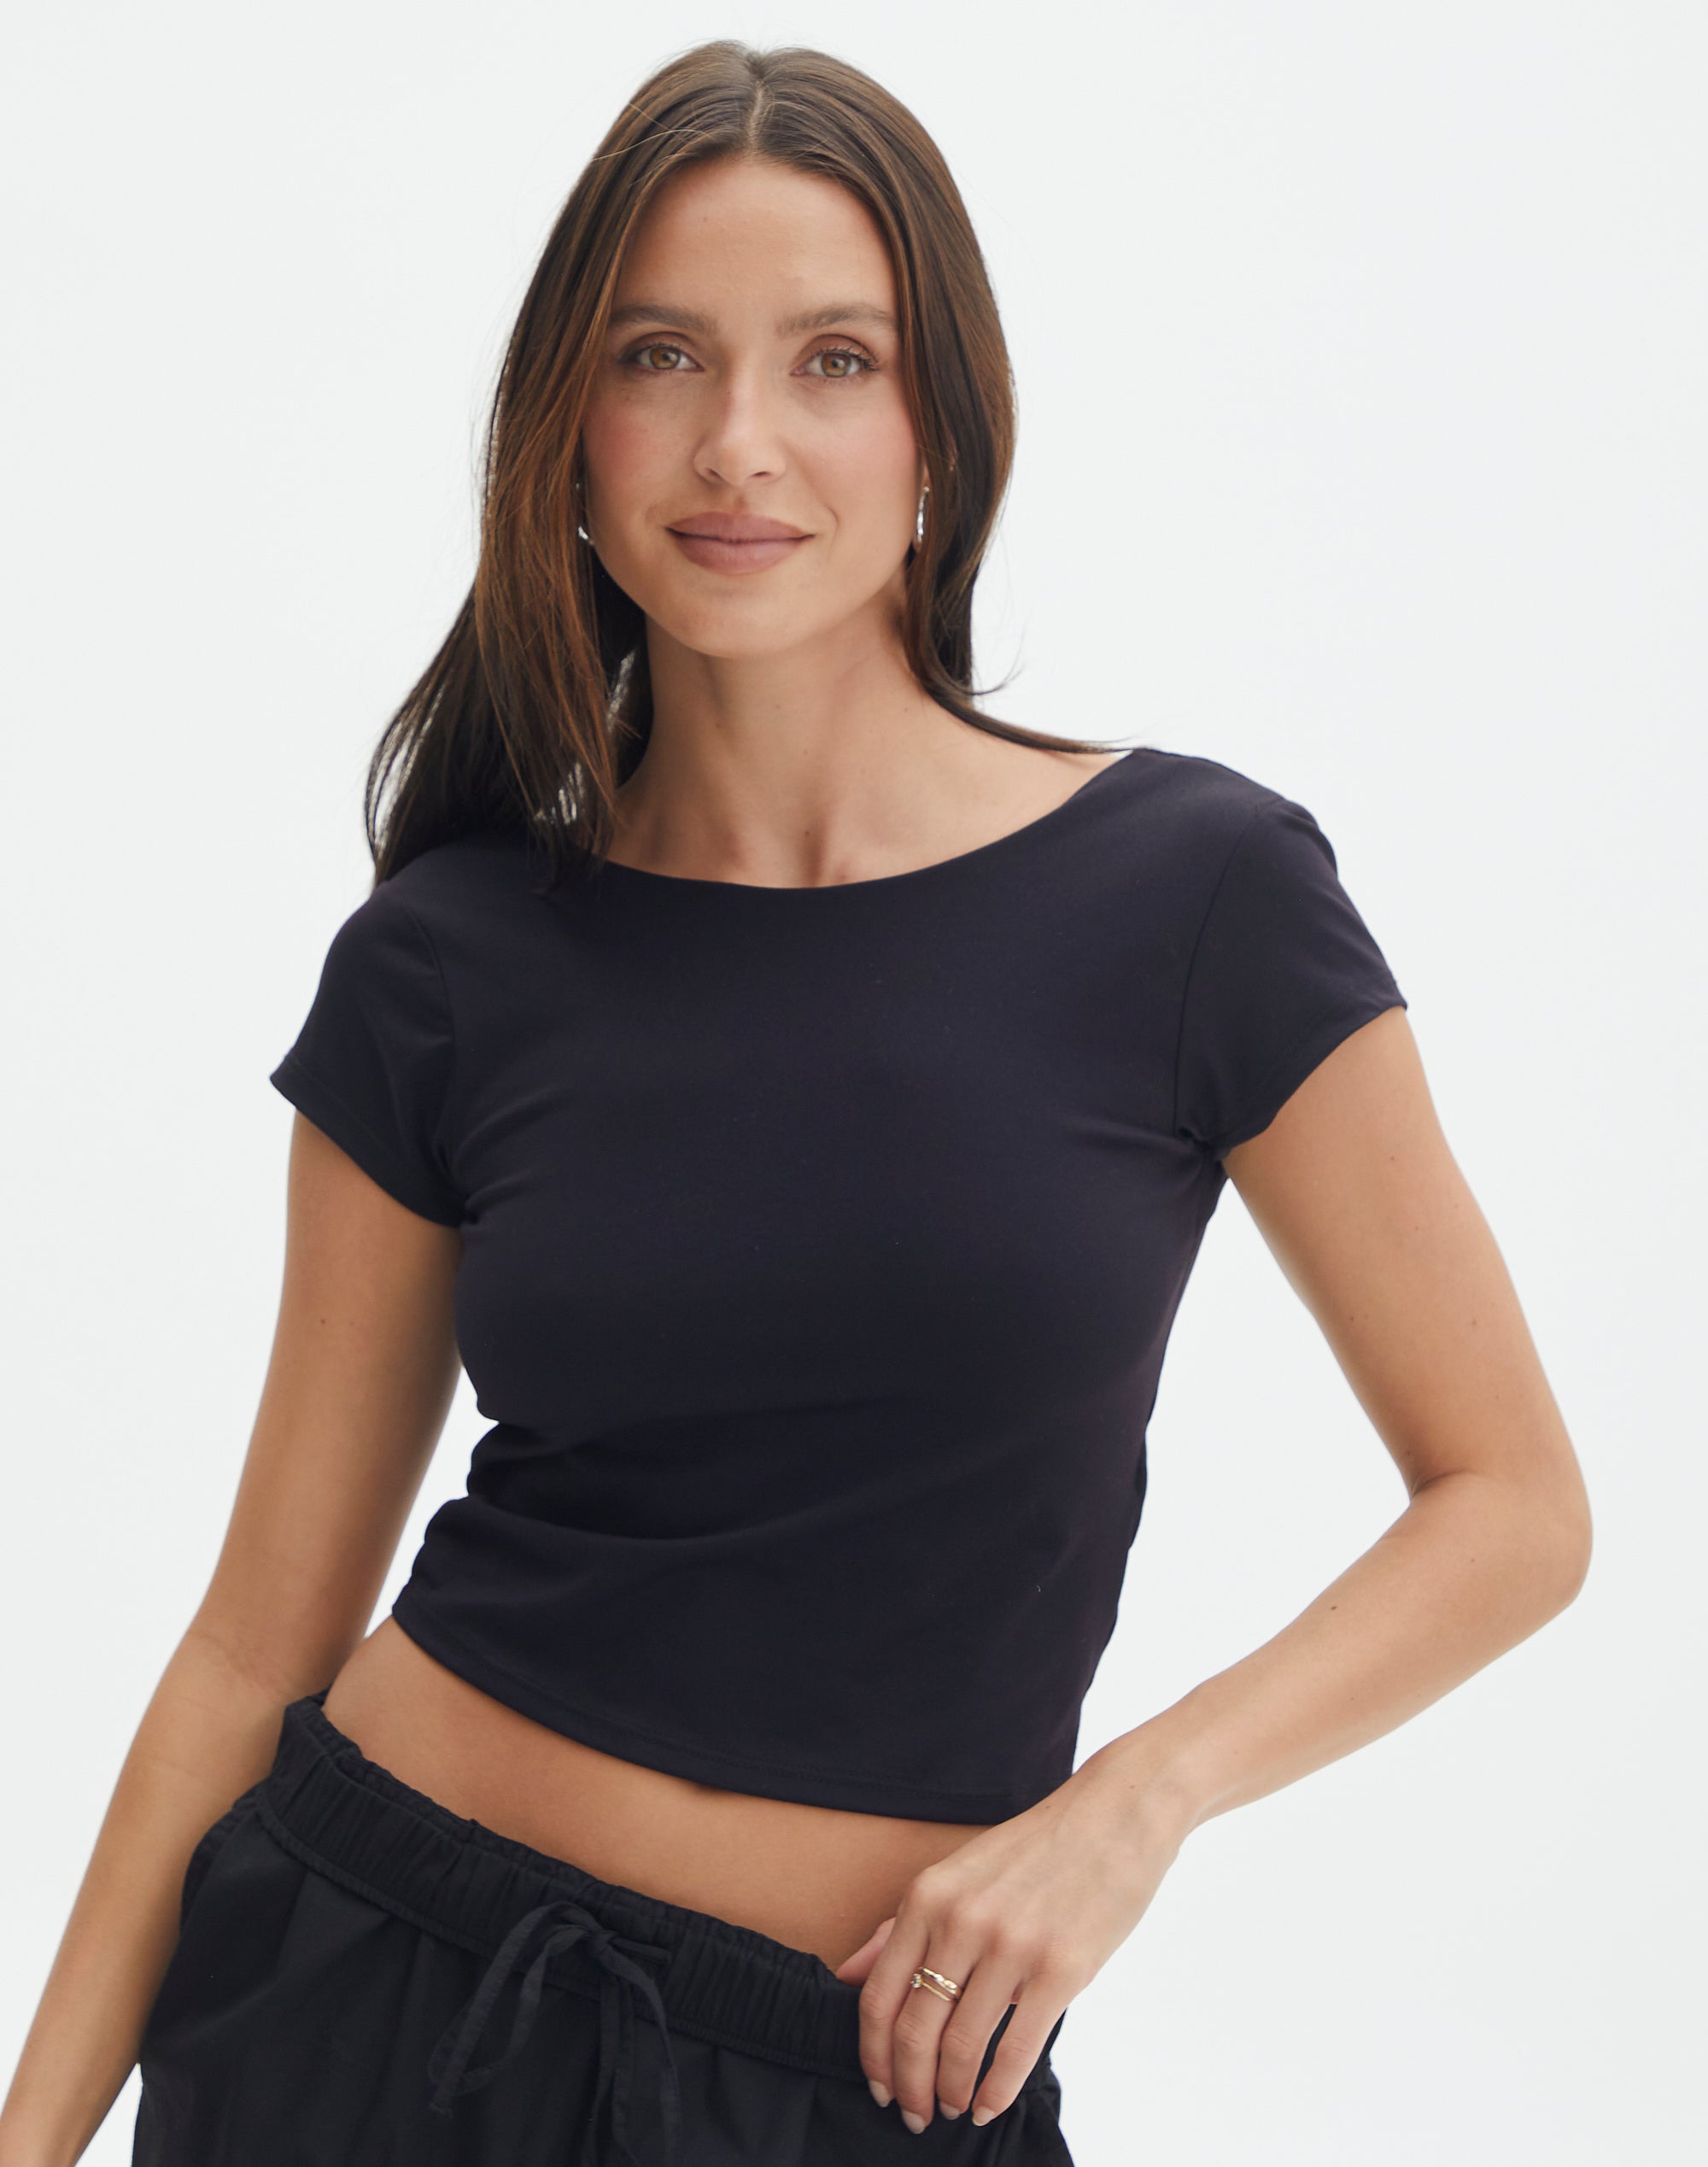 https://www.glassons.com/content/products/bayley-backless-top-black-imageback-ts73693pch.jpg